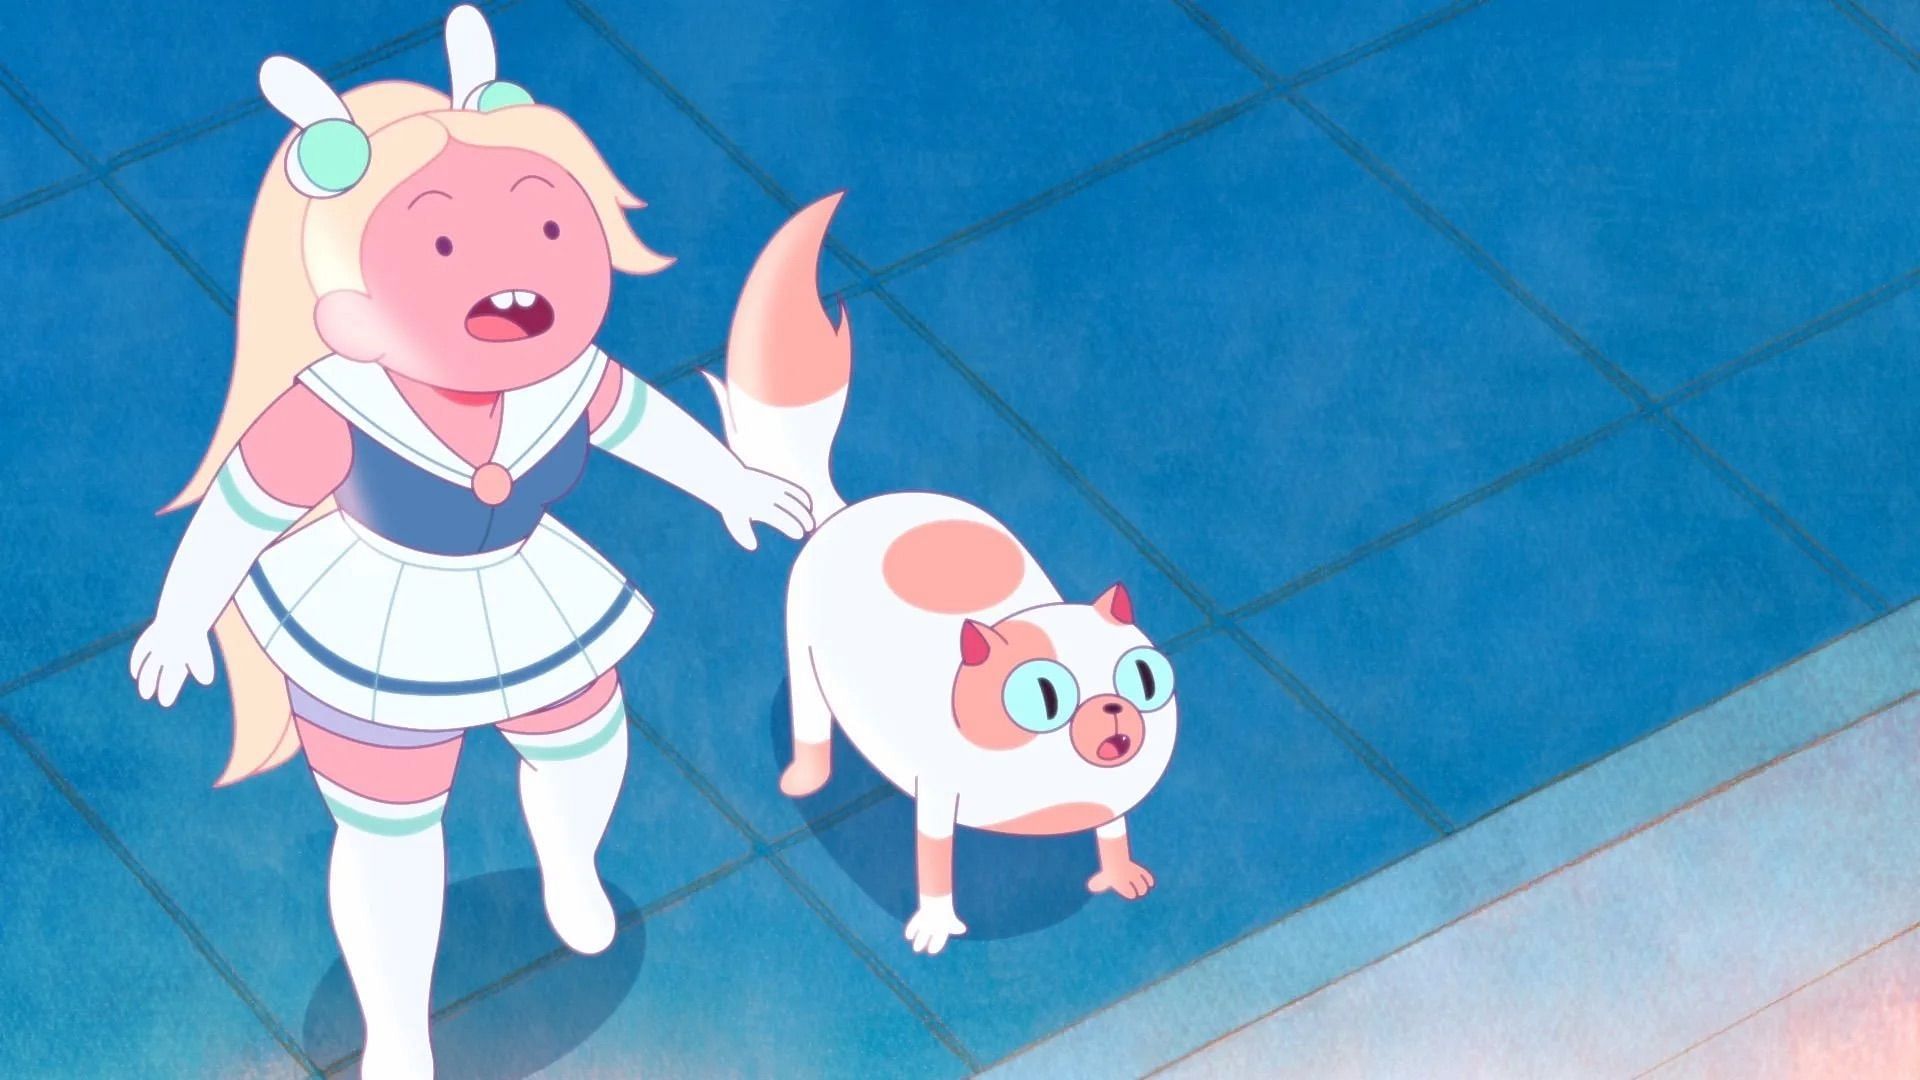 Adventure time Fionna and cake season 2 confirmed release date